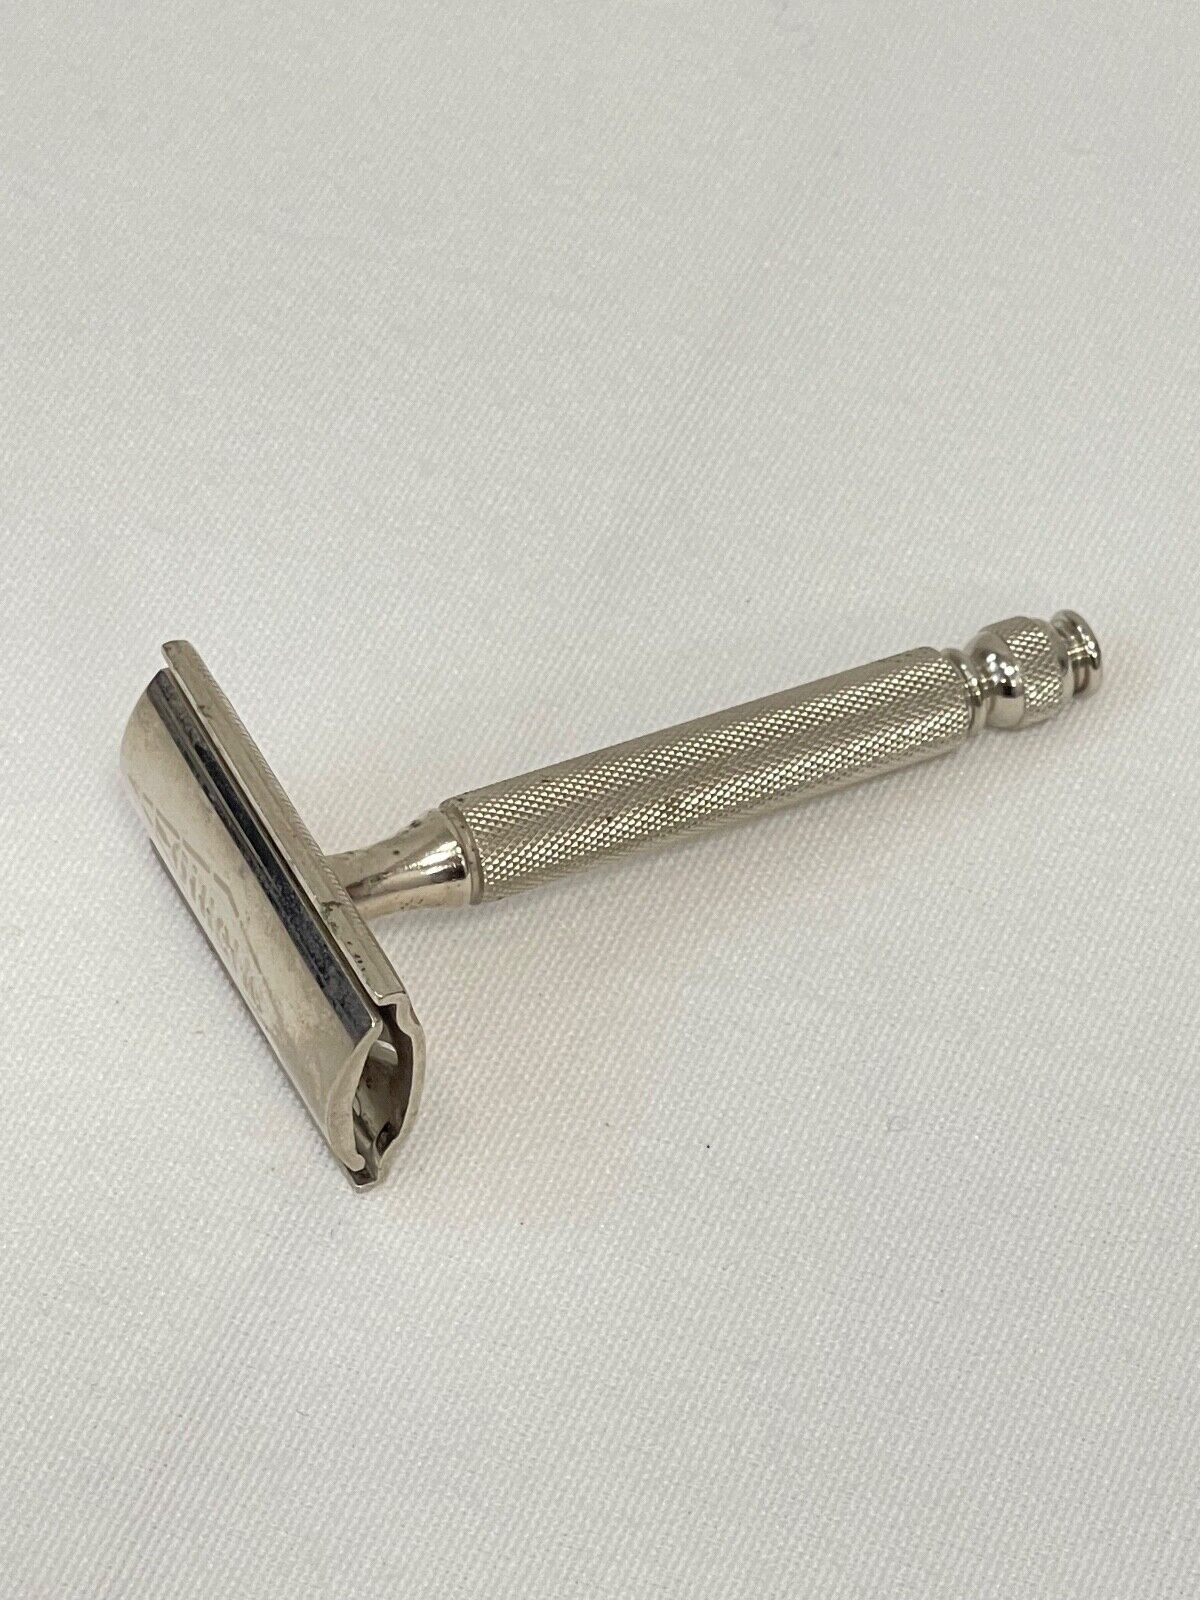 Vintage Gillete Men\'s Safety Razor Made in USA Beard Care Barber Grooming Tool